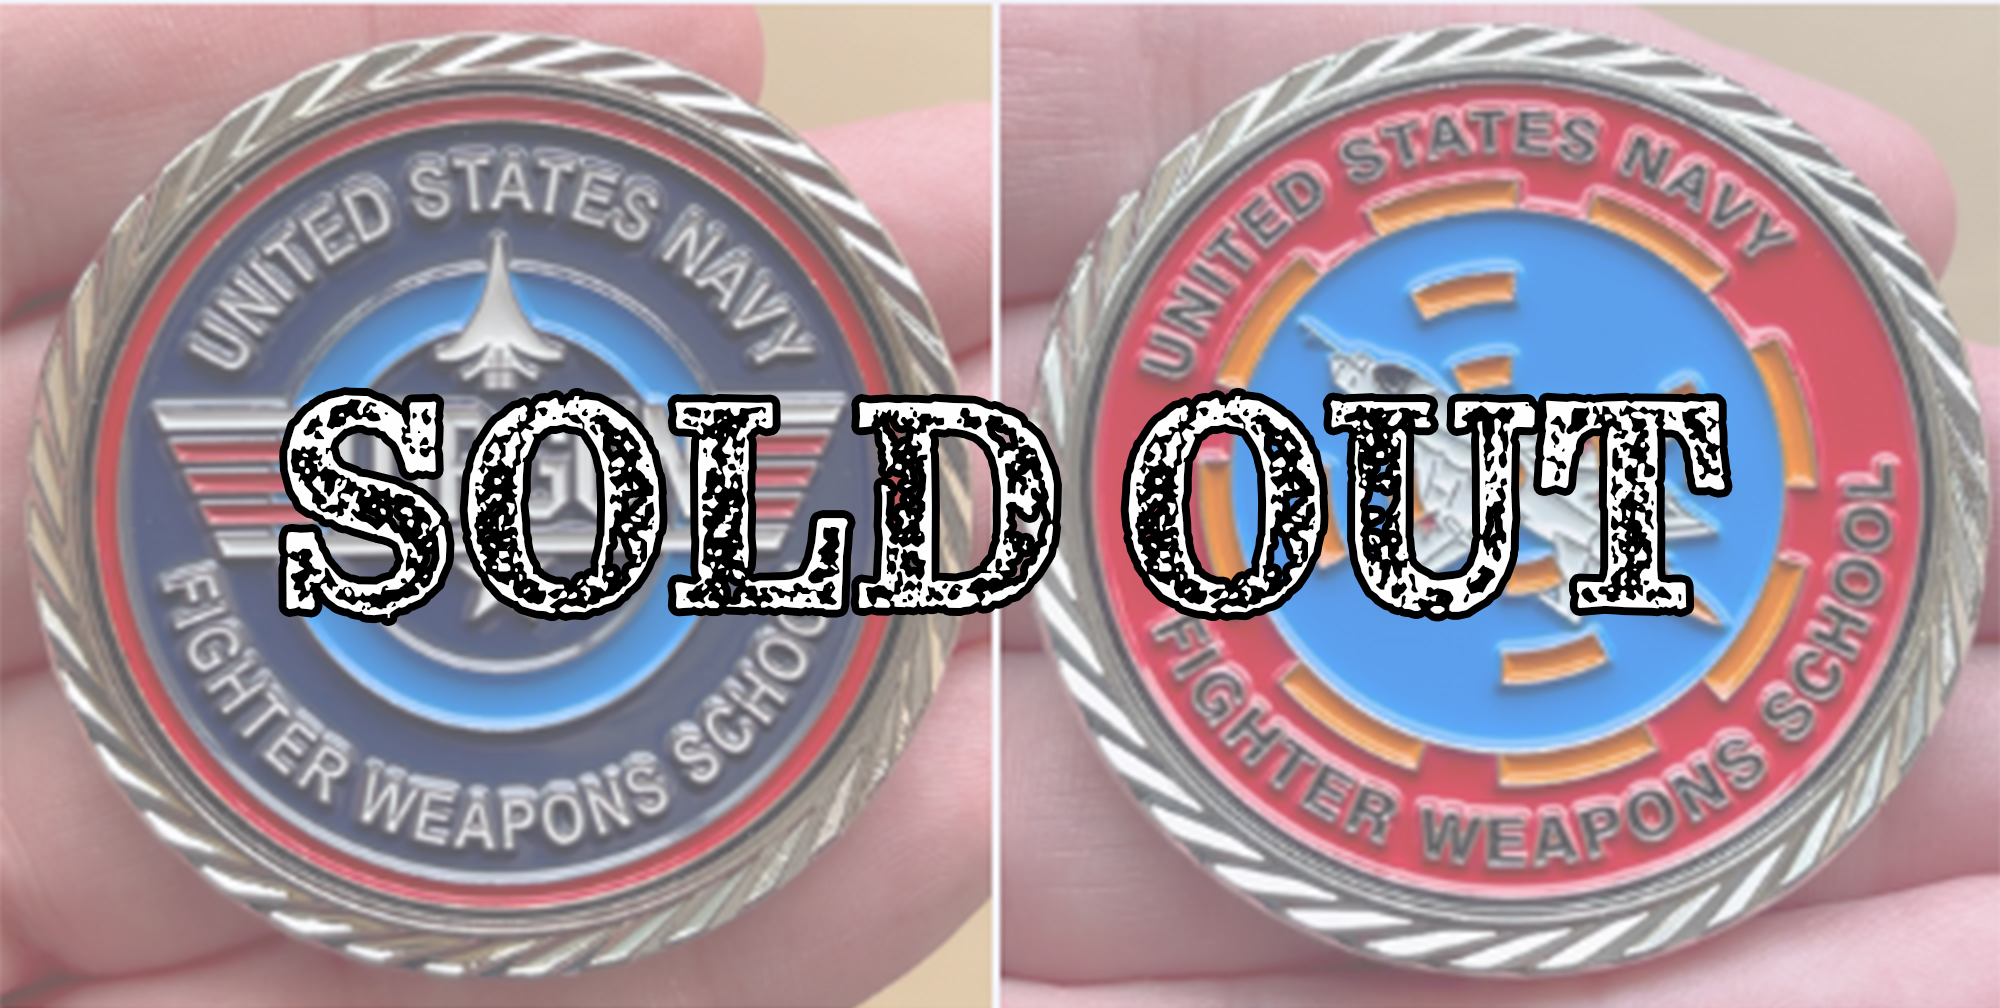 The TOPGUN Challenge Coin: Sold Out!